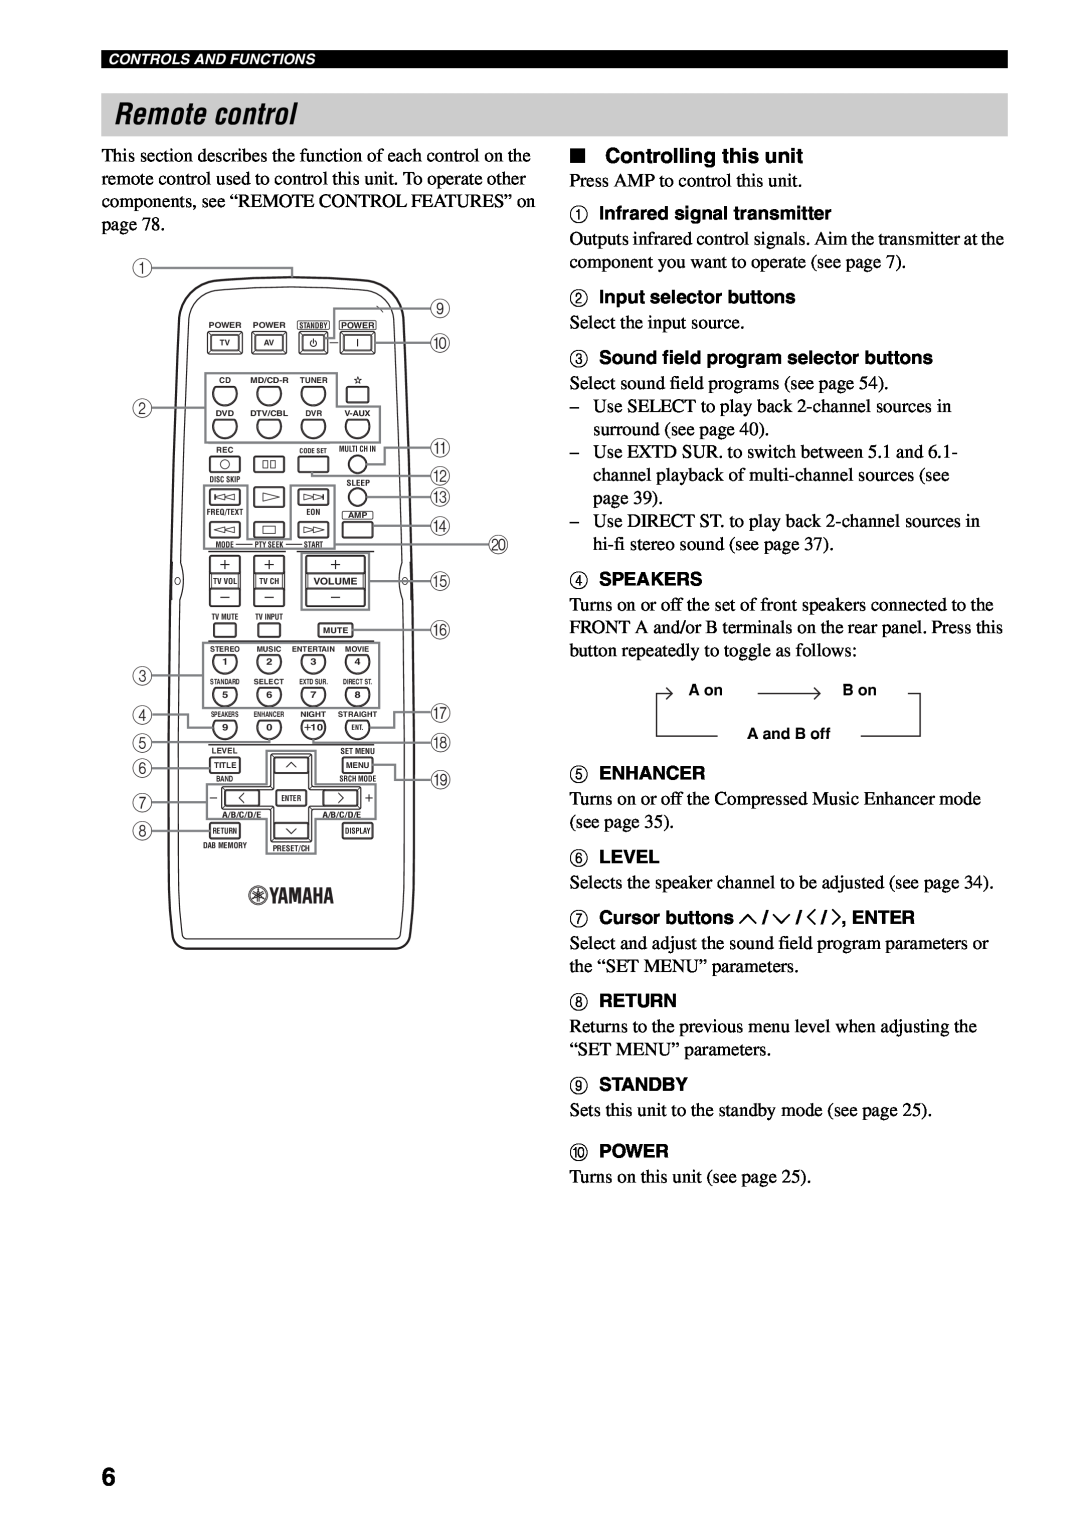 Yamaha RX-V459 owner manual Remote control, Controlling this unit 